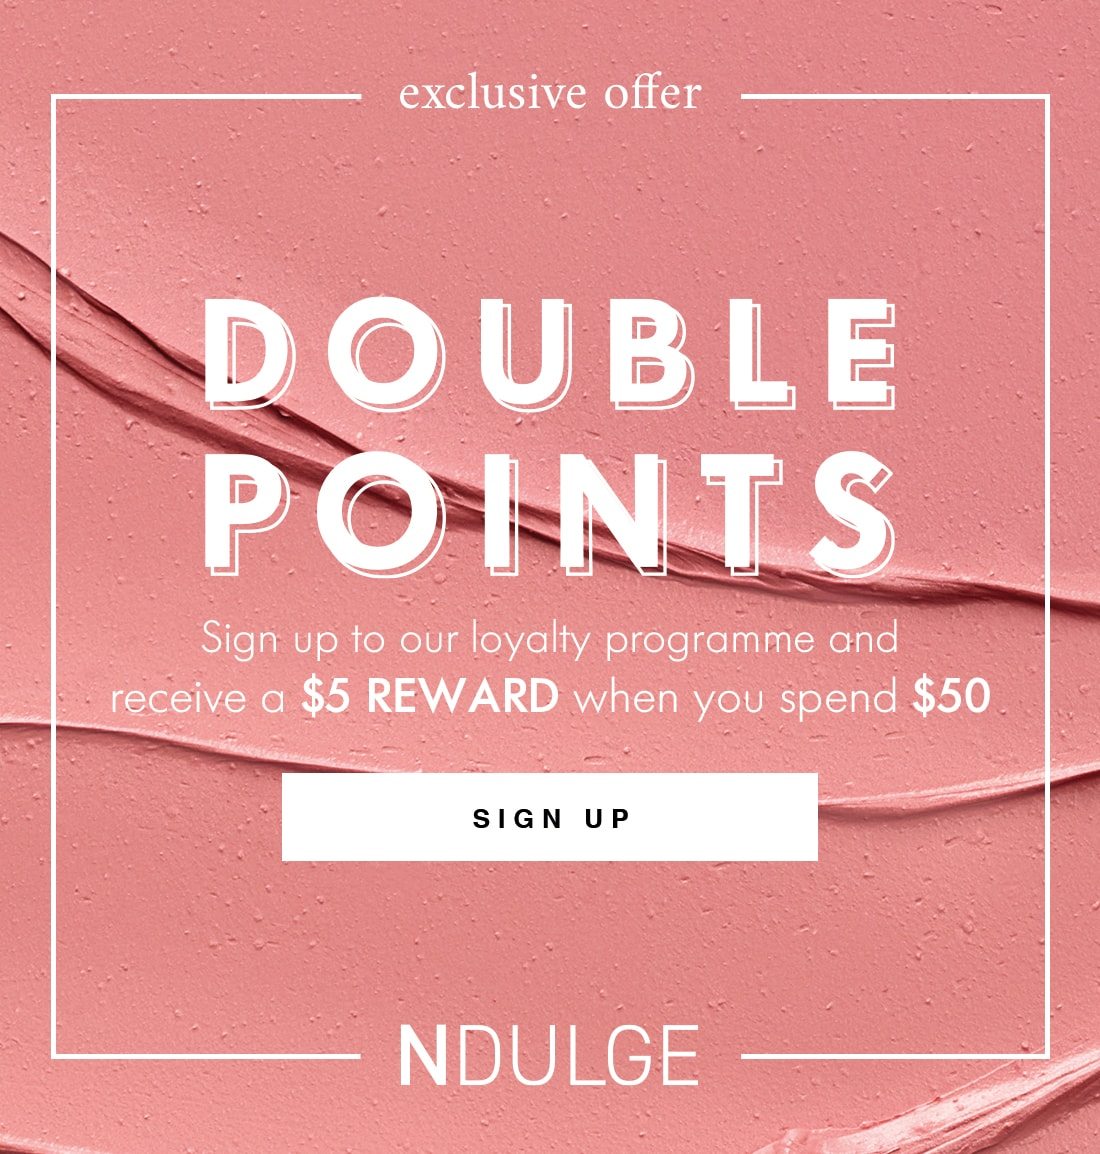 exclusive offer DOUBLE POINTS Sign up to our loyalty programme and receive a $5 REWARD when you spend $50 SIGN UP NDULGE